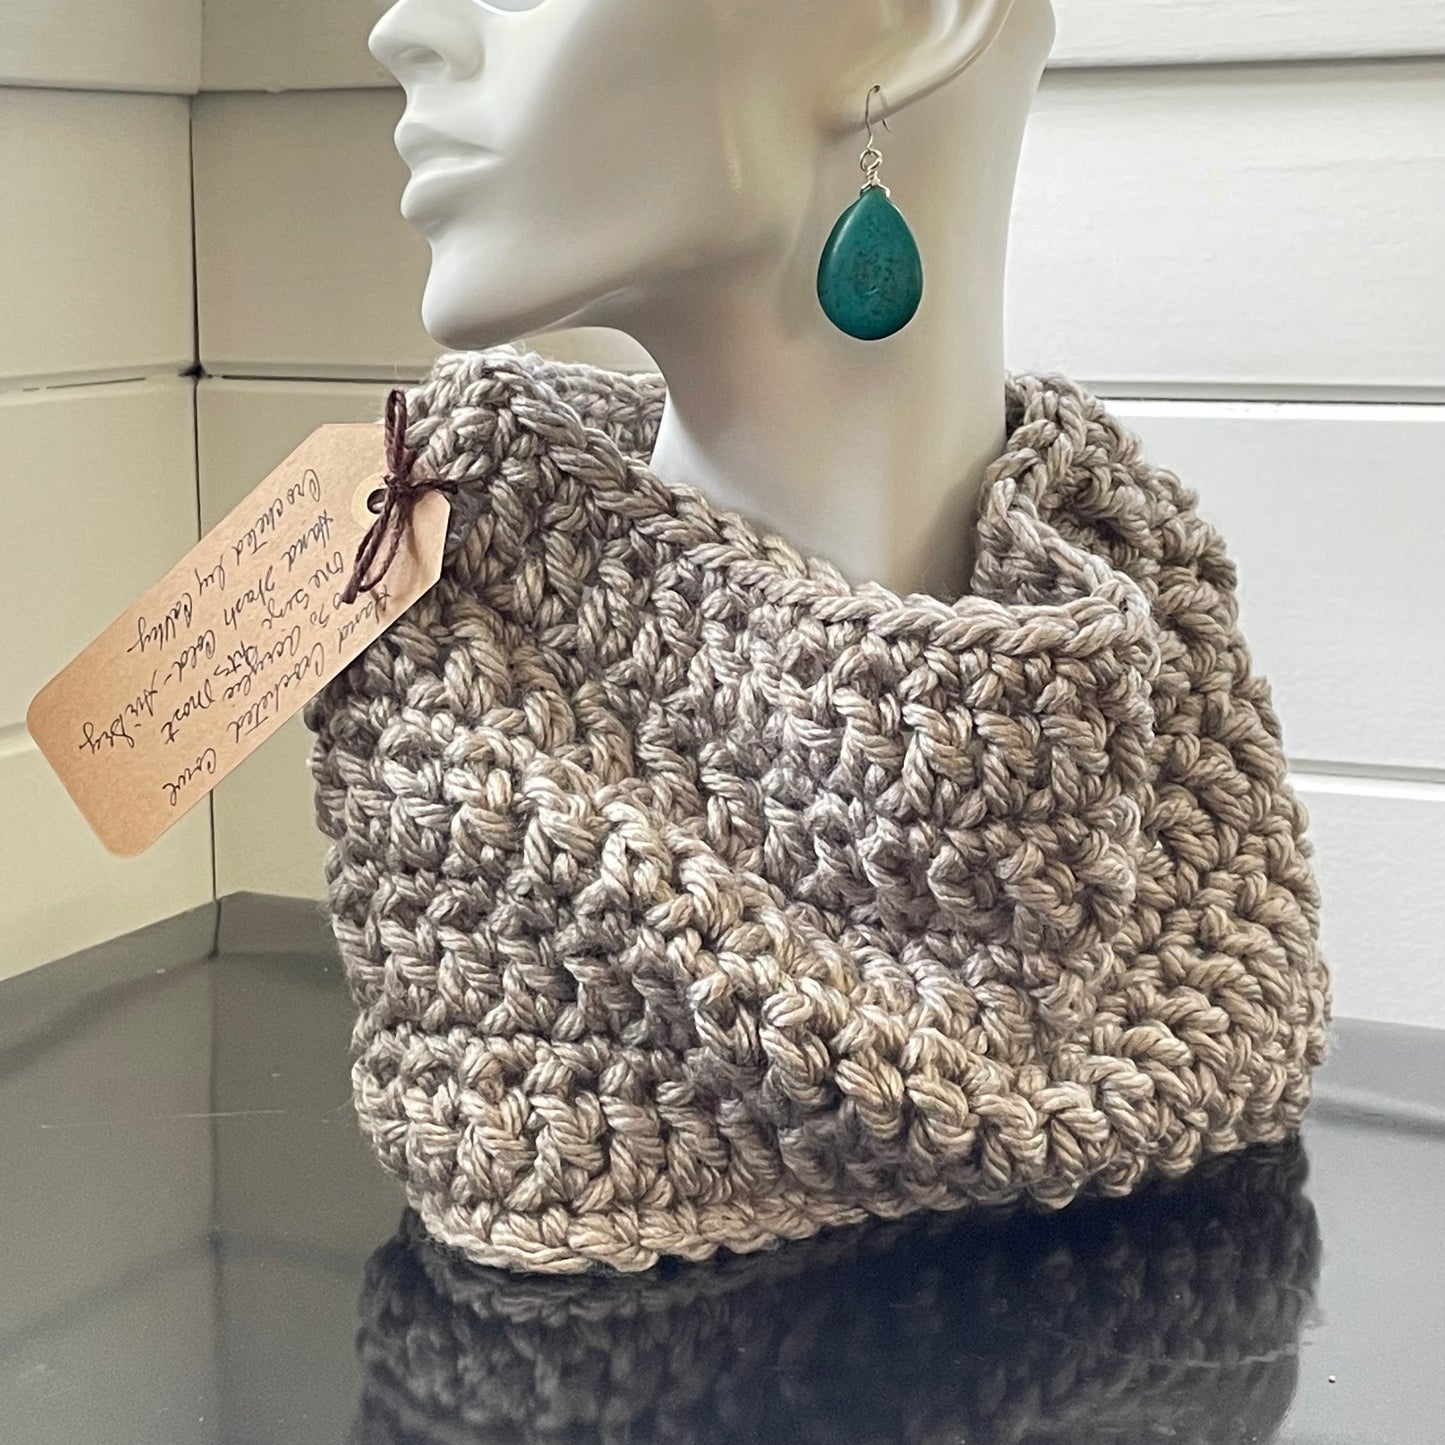 Extra Soft Pewter Silver Marbled Cowl Infinity Scarf Hand Crochet Knit Winter Fall Spring Unisex Men Women Grey Gray